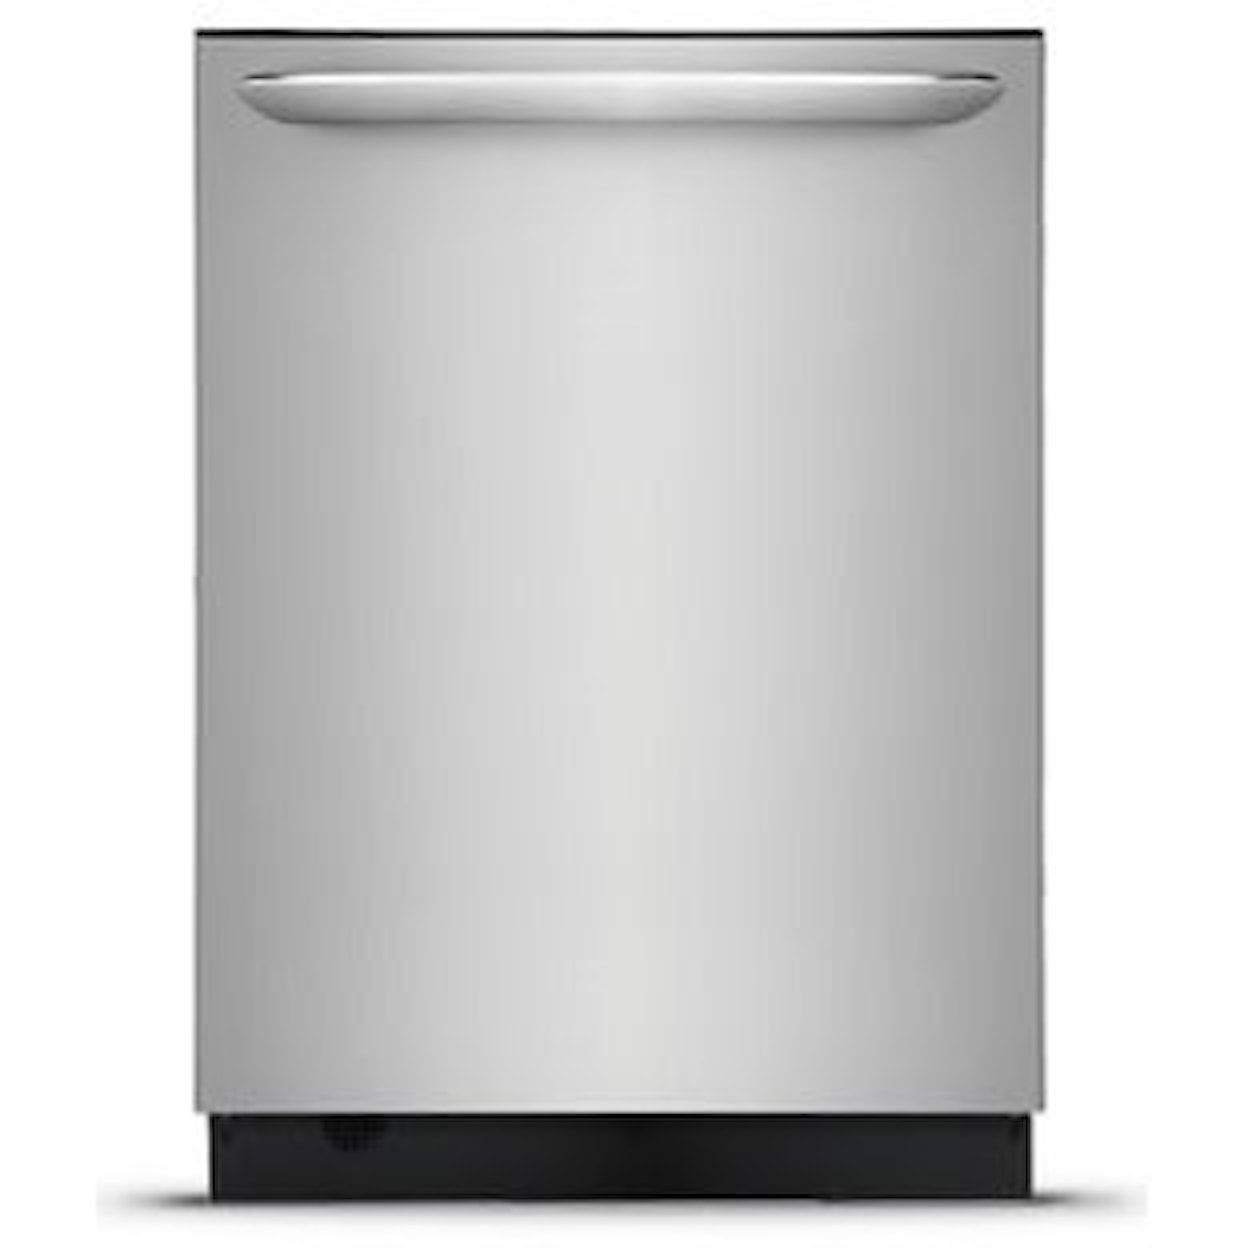 Frigidaire Frigidaire Gallery Dishwashers 24" Built-In Dishwasher with EvenDry™ System